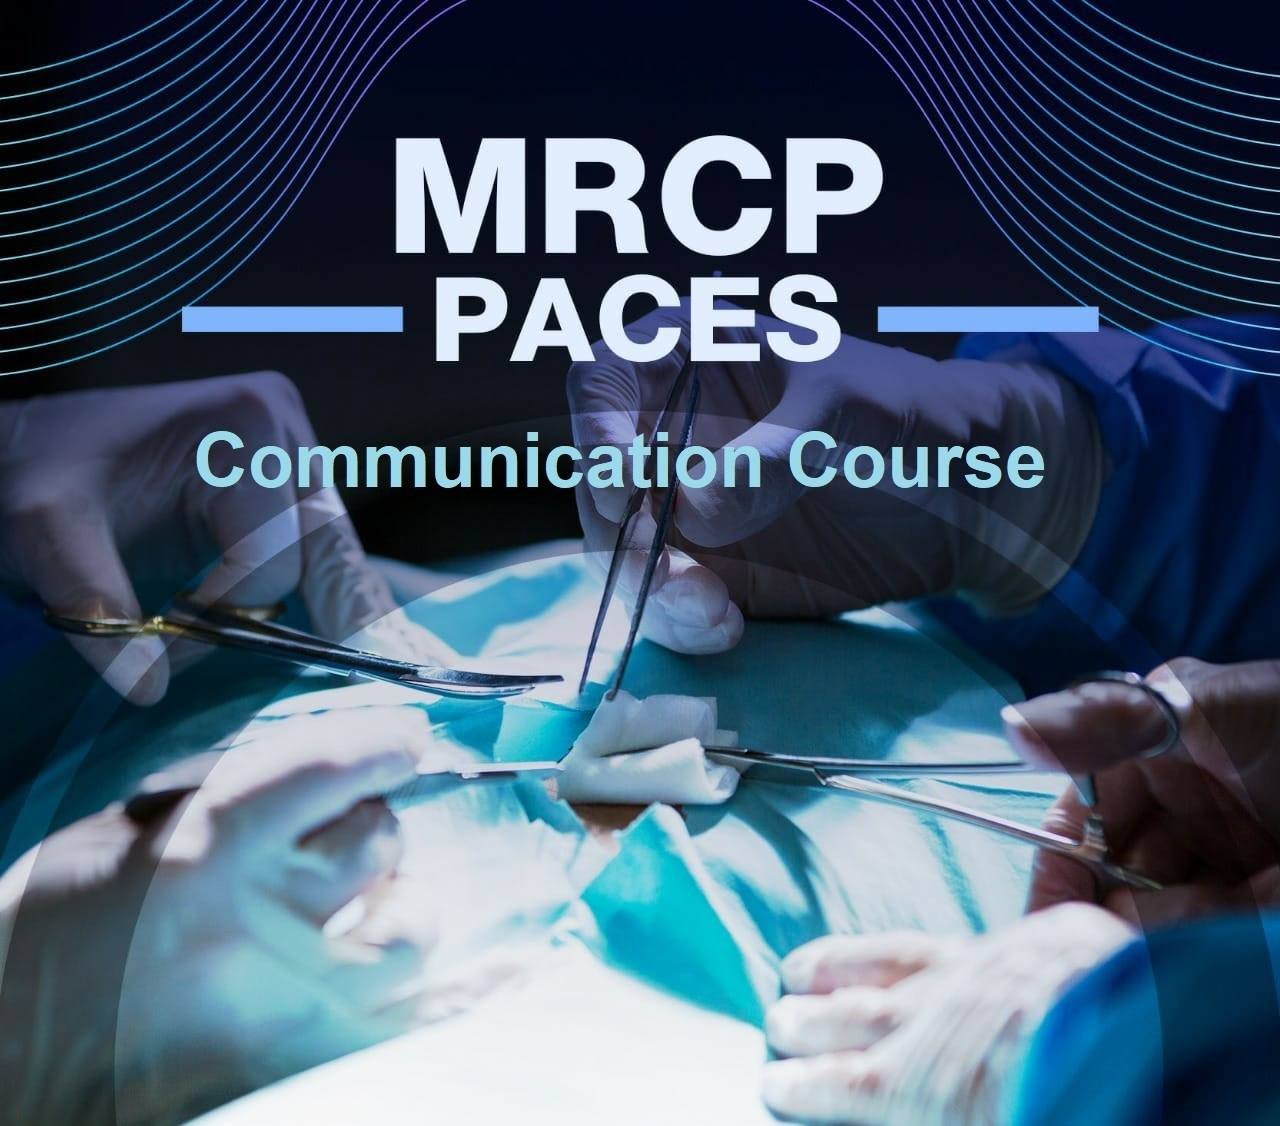 mrcp paces